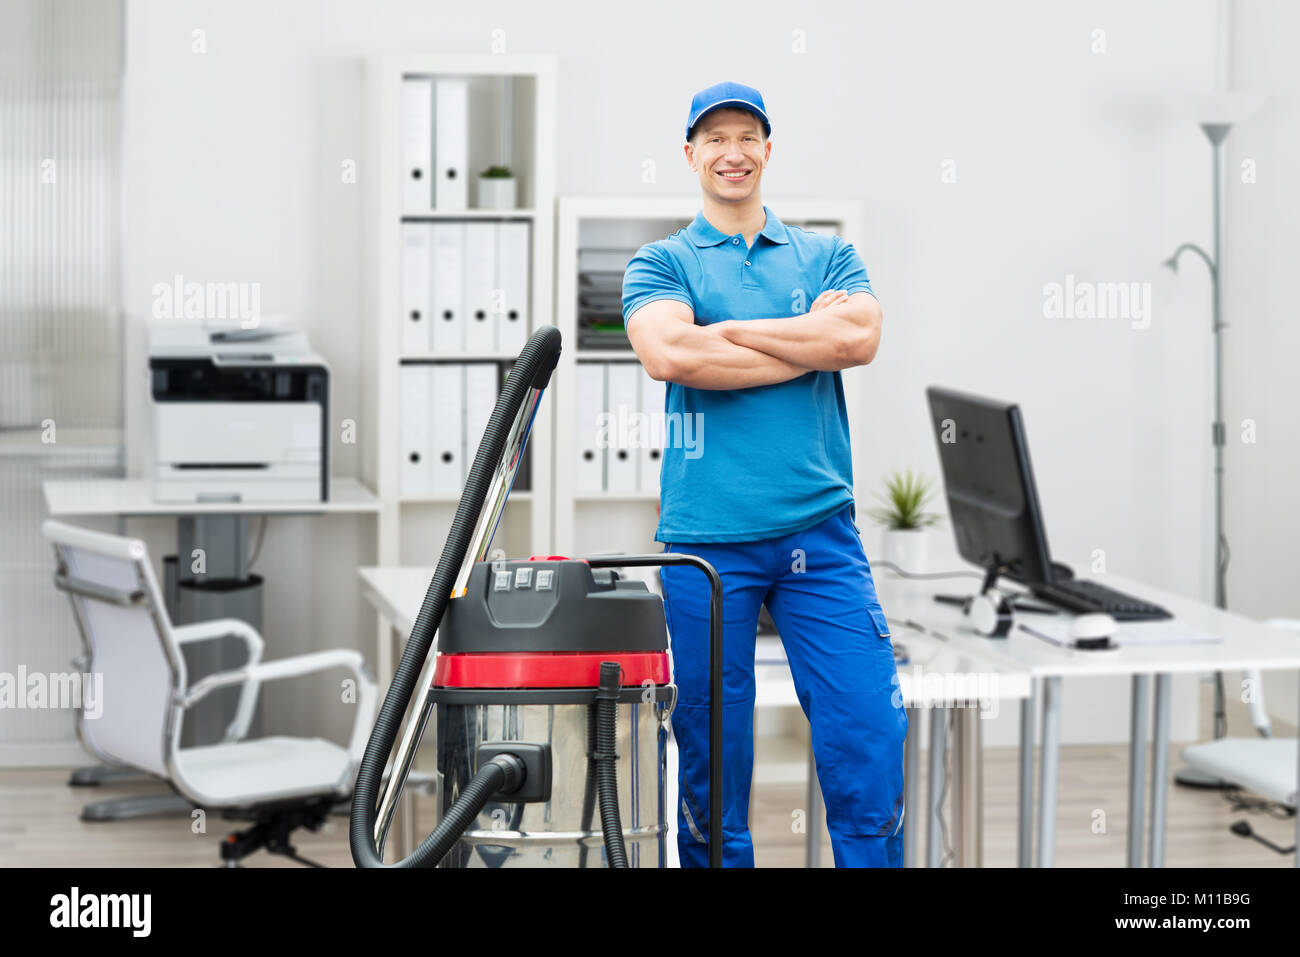 Portrait Of A Smiling Young Male Cleaner With Arms Crossed Standing In Office Stock Photo